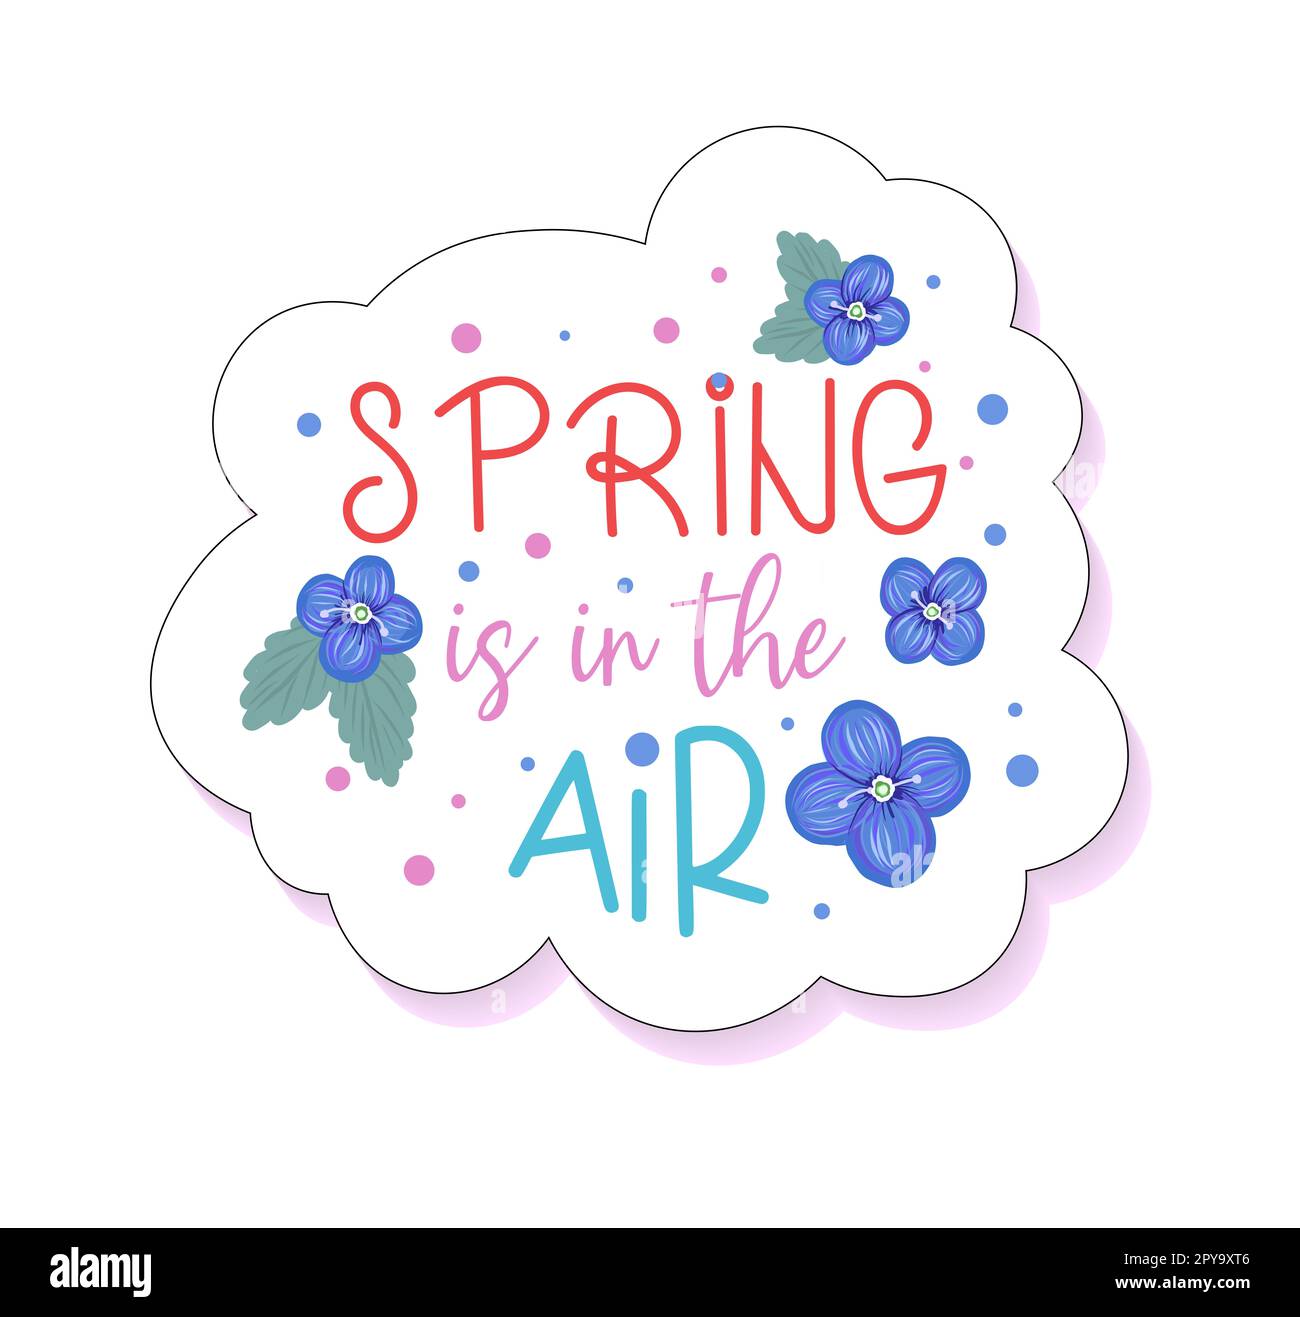 Spring is in air. sticker small blue flowers. spring flowers hyacinth. cute cartoon stickers. Stock Photo